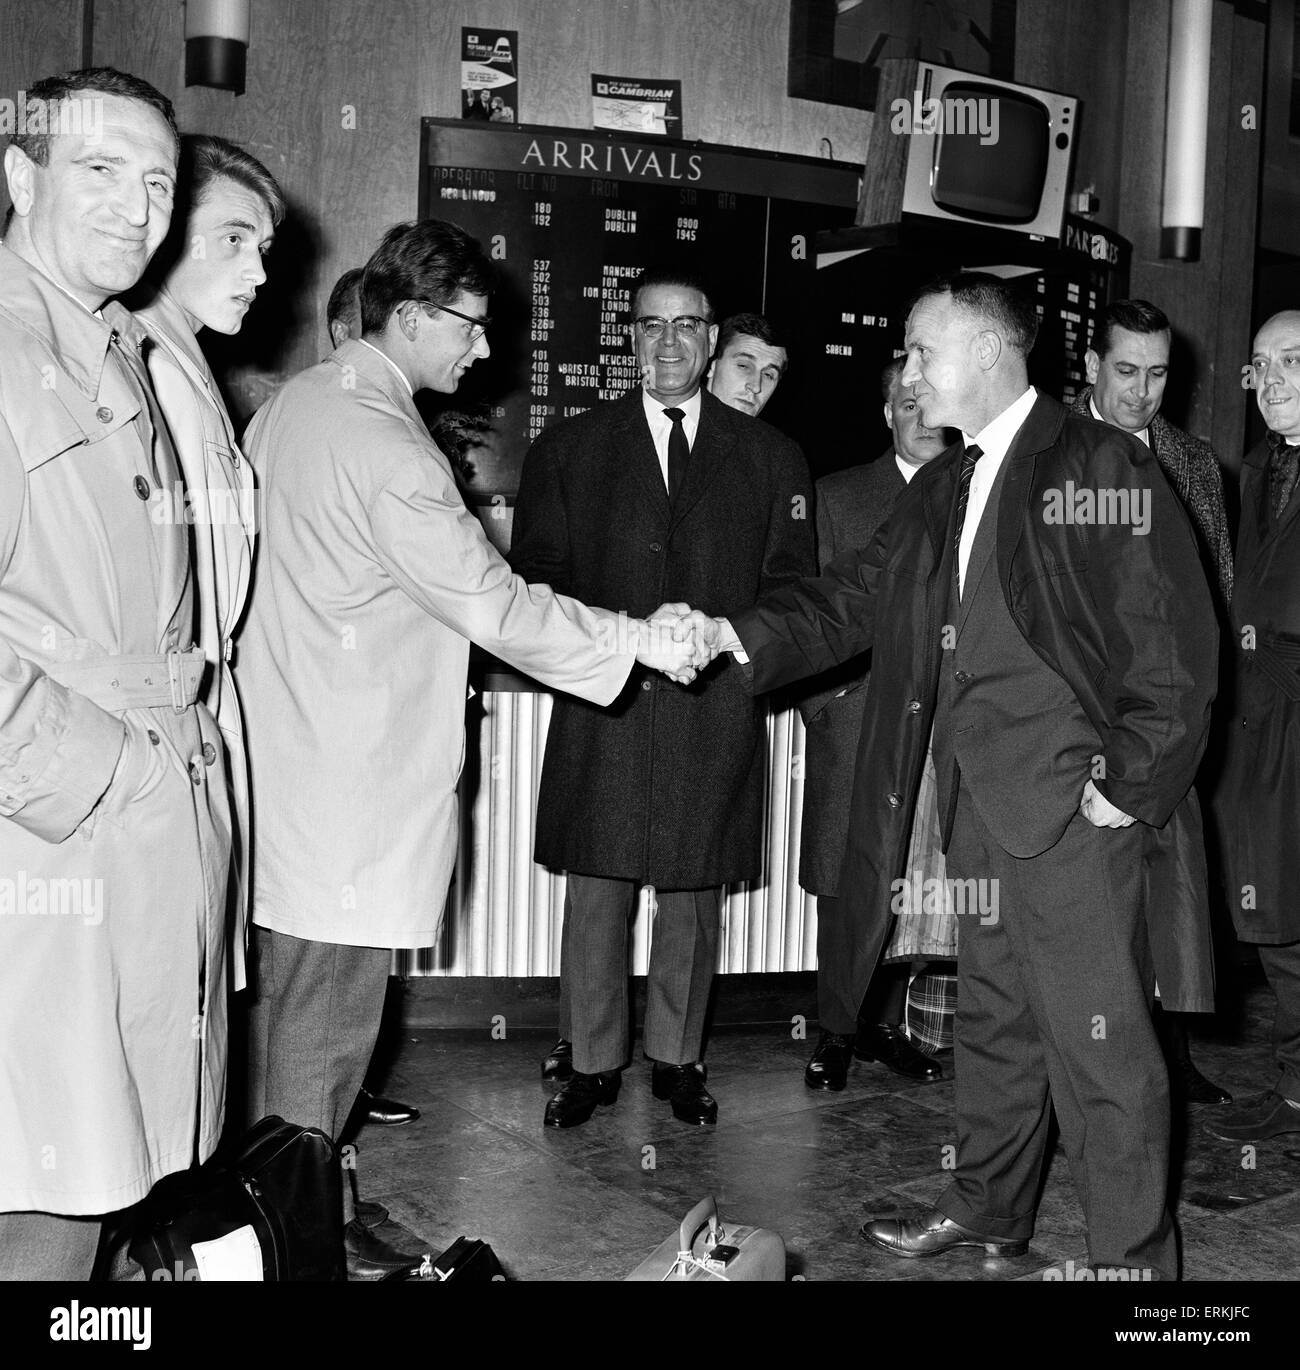 Liverpool manager Bill Shankly greets Jozef Jurion, captain of the Belgian team Anderlecht as they arrive at Speke airport, Liverpool. 23rd November 1964. Stock Photo